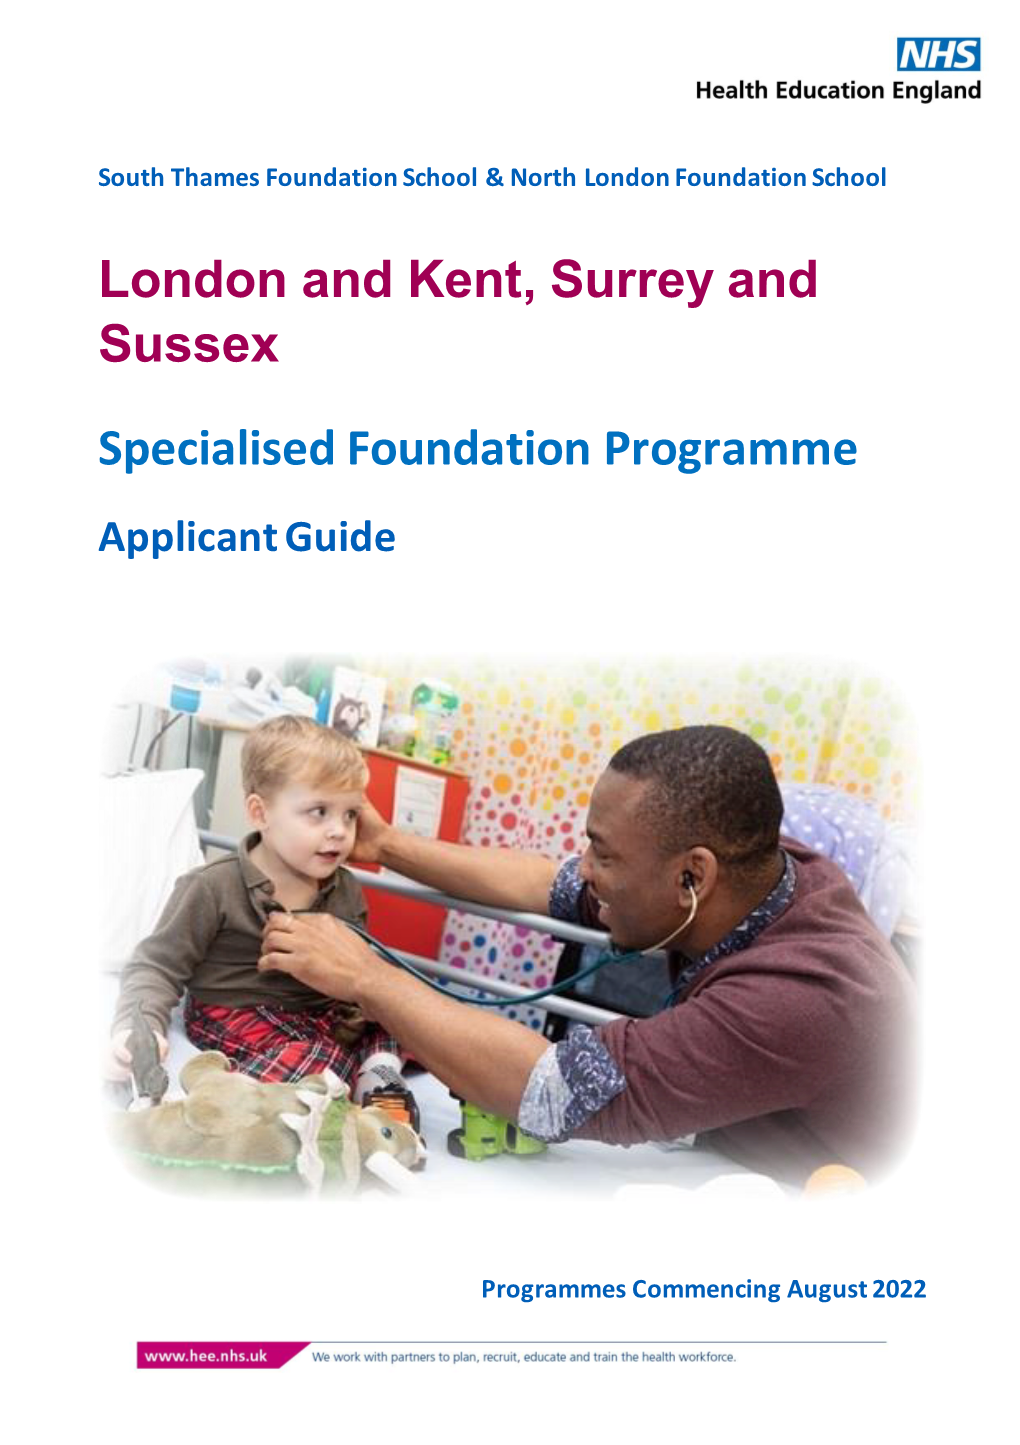 London and Kent, Surrey and Sussex Specialised Foundation Programme – Specialised Unit of Application